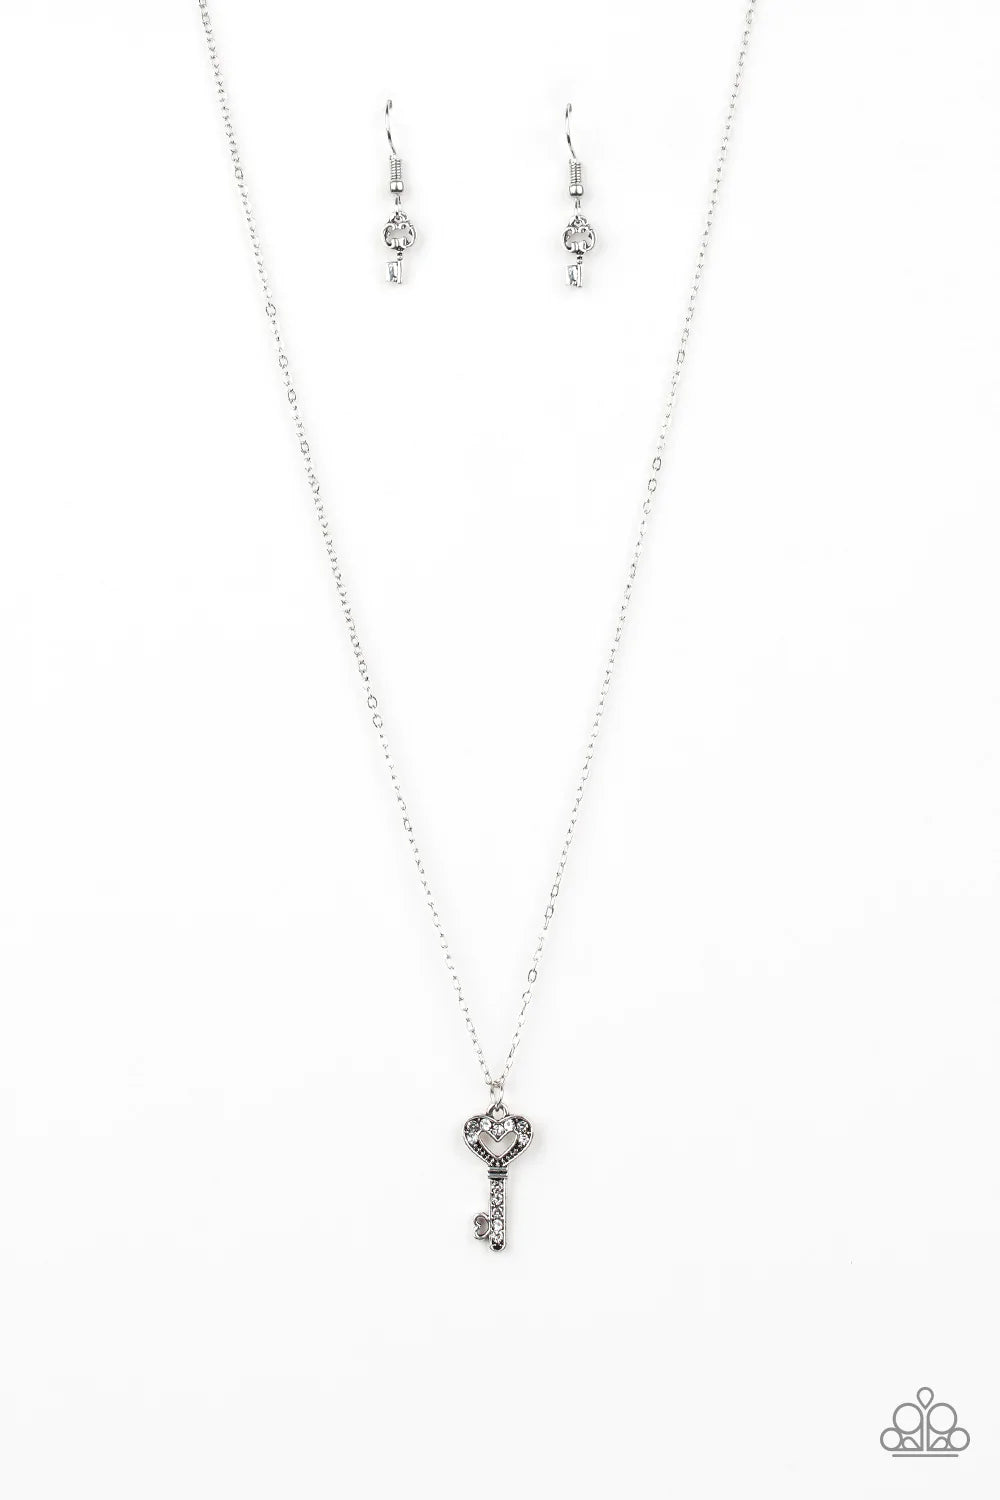 Paparazzi Necklace ~ Lock Up Your Valuables - White